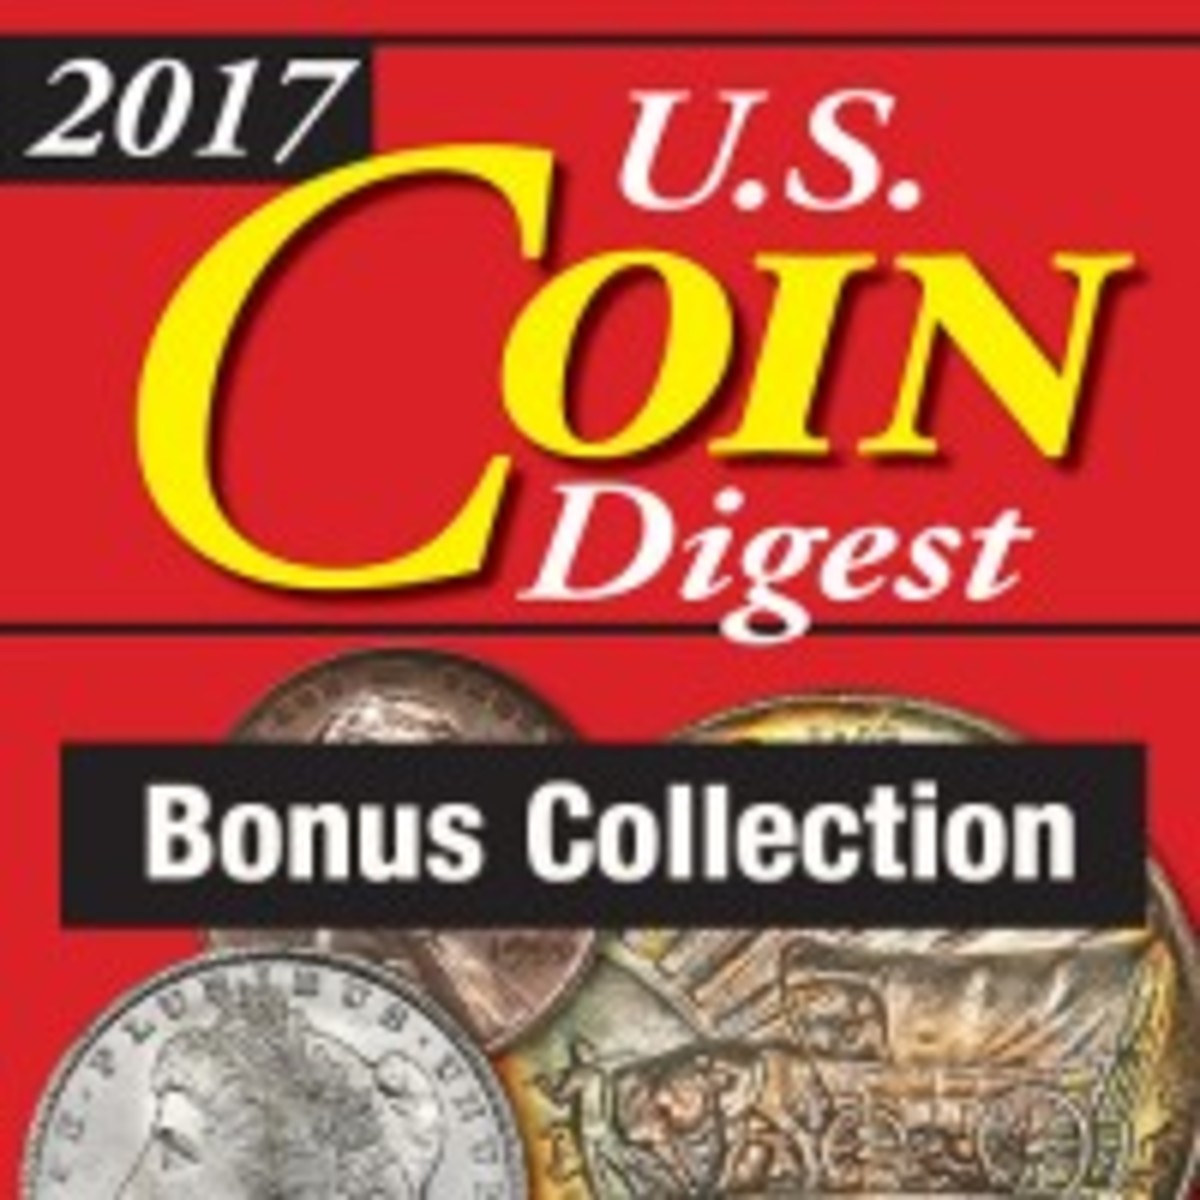 The 2017 U.S. Coin Digest Bonus Collection is packed with all the tools a collector needs!